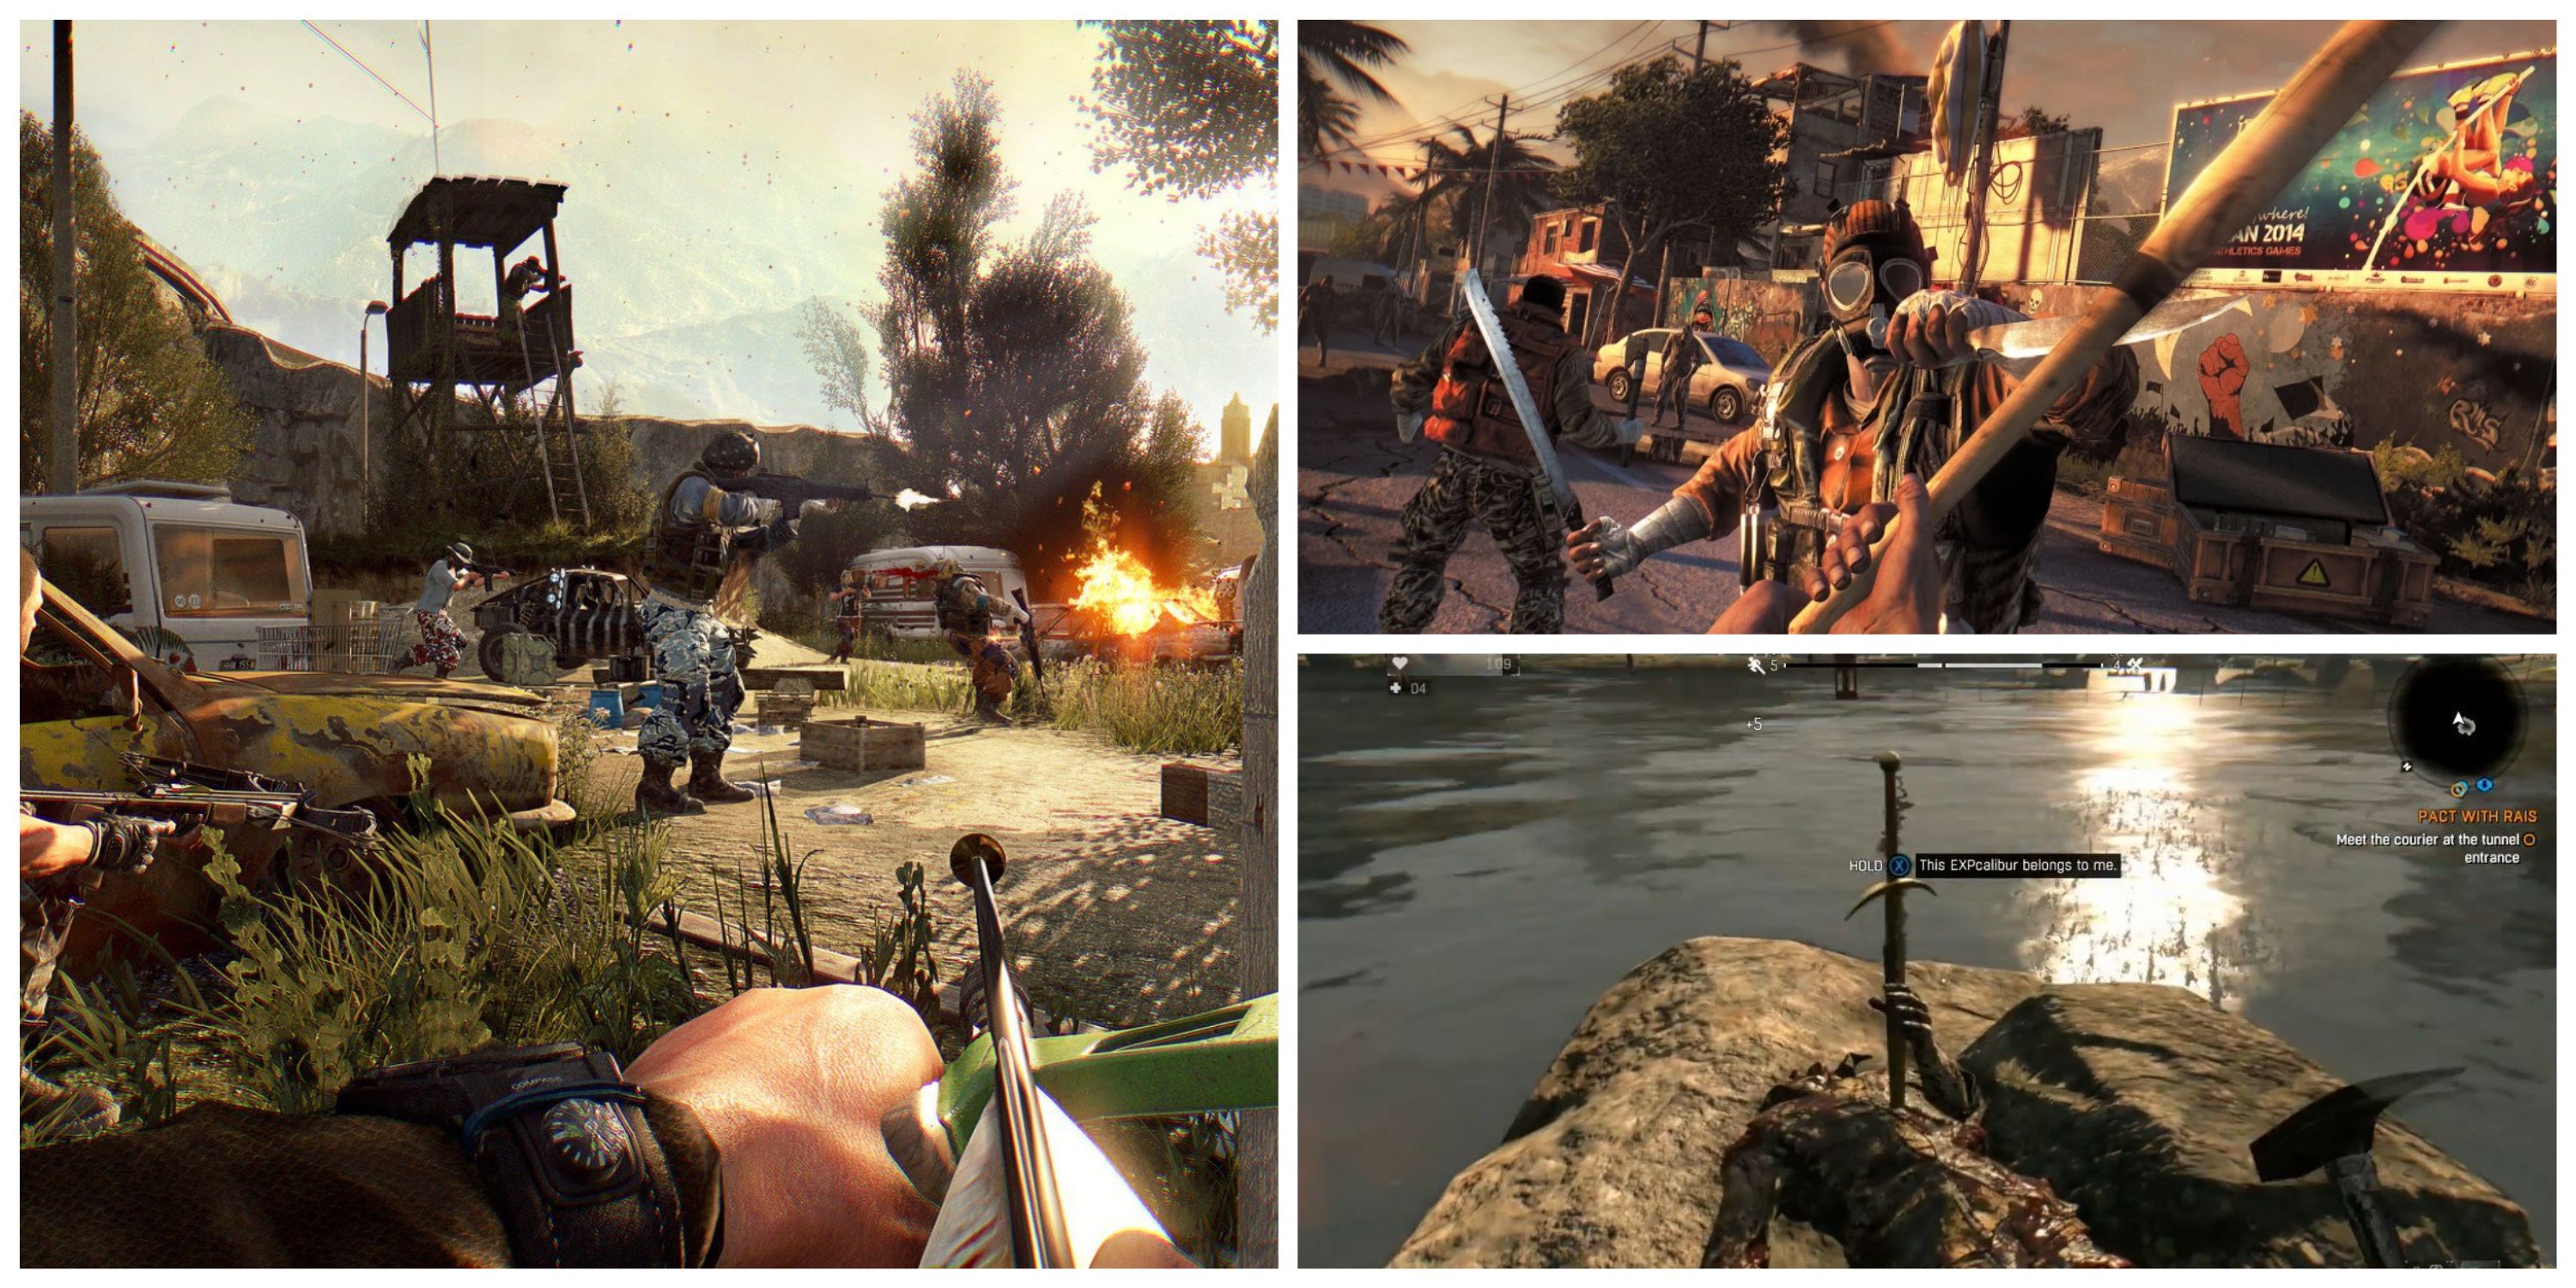 bow, expcalibur and a baseball bat in dying light